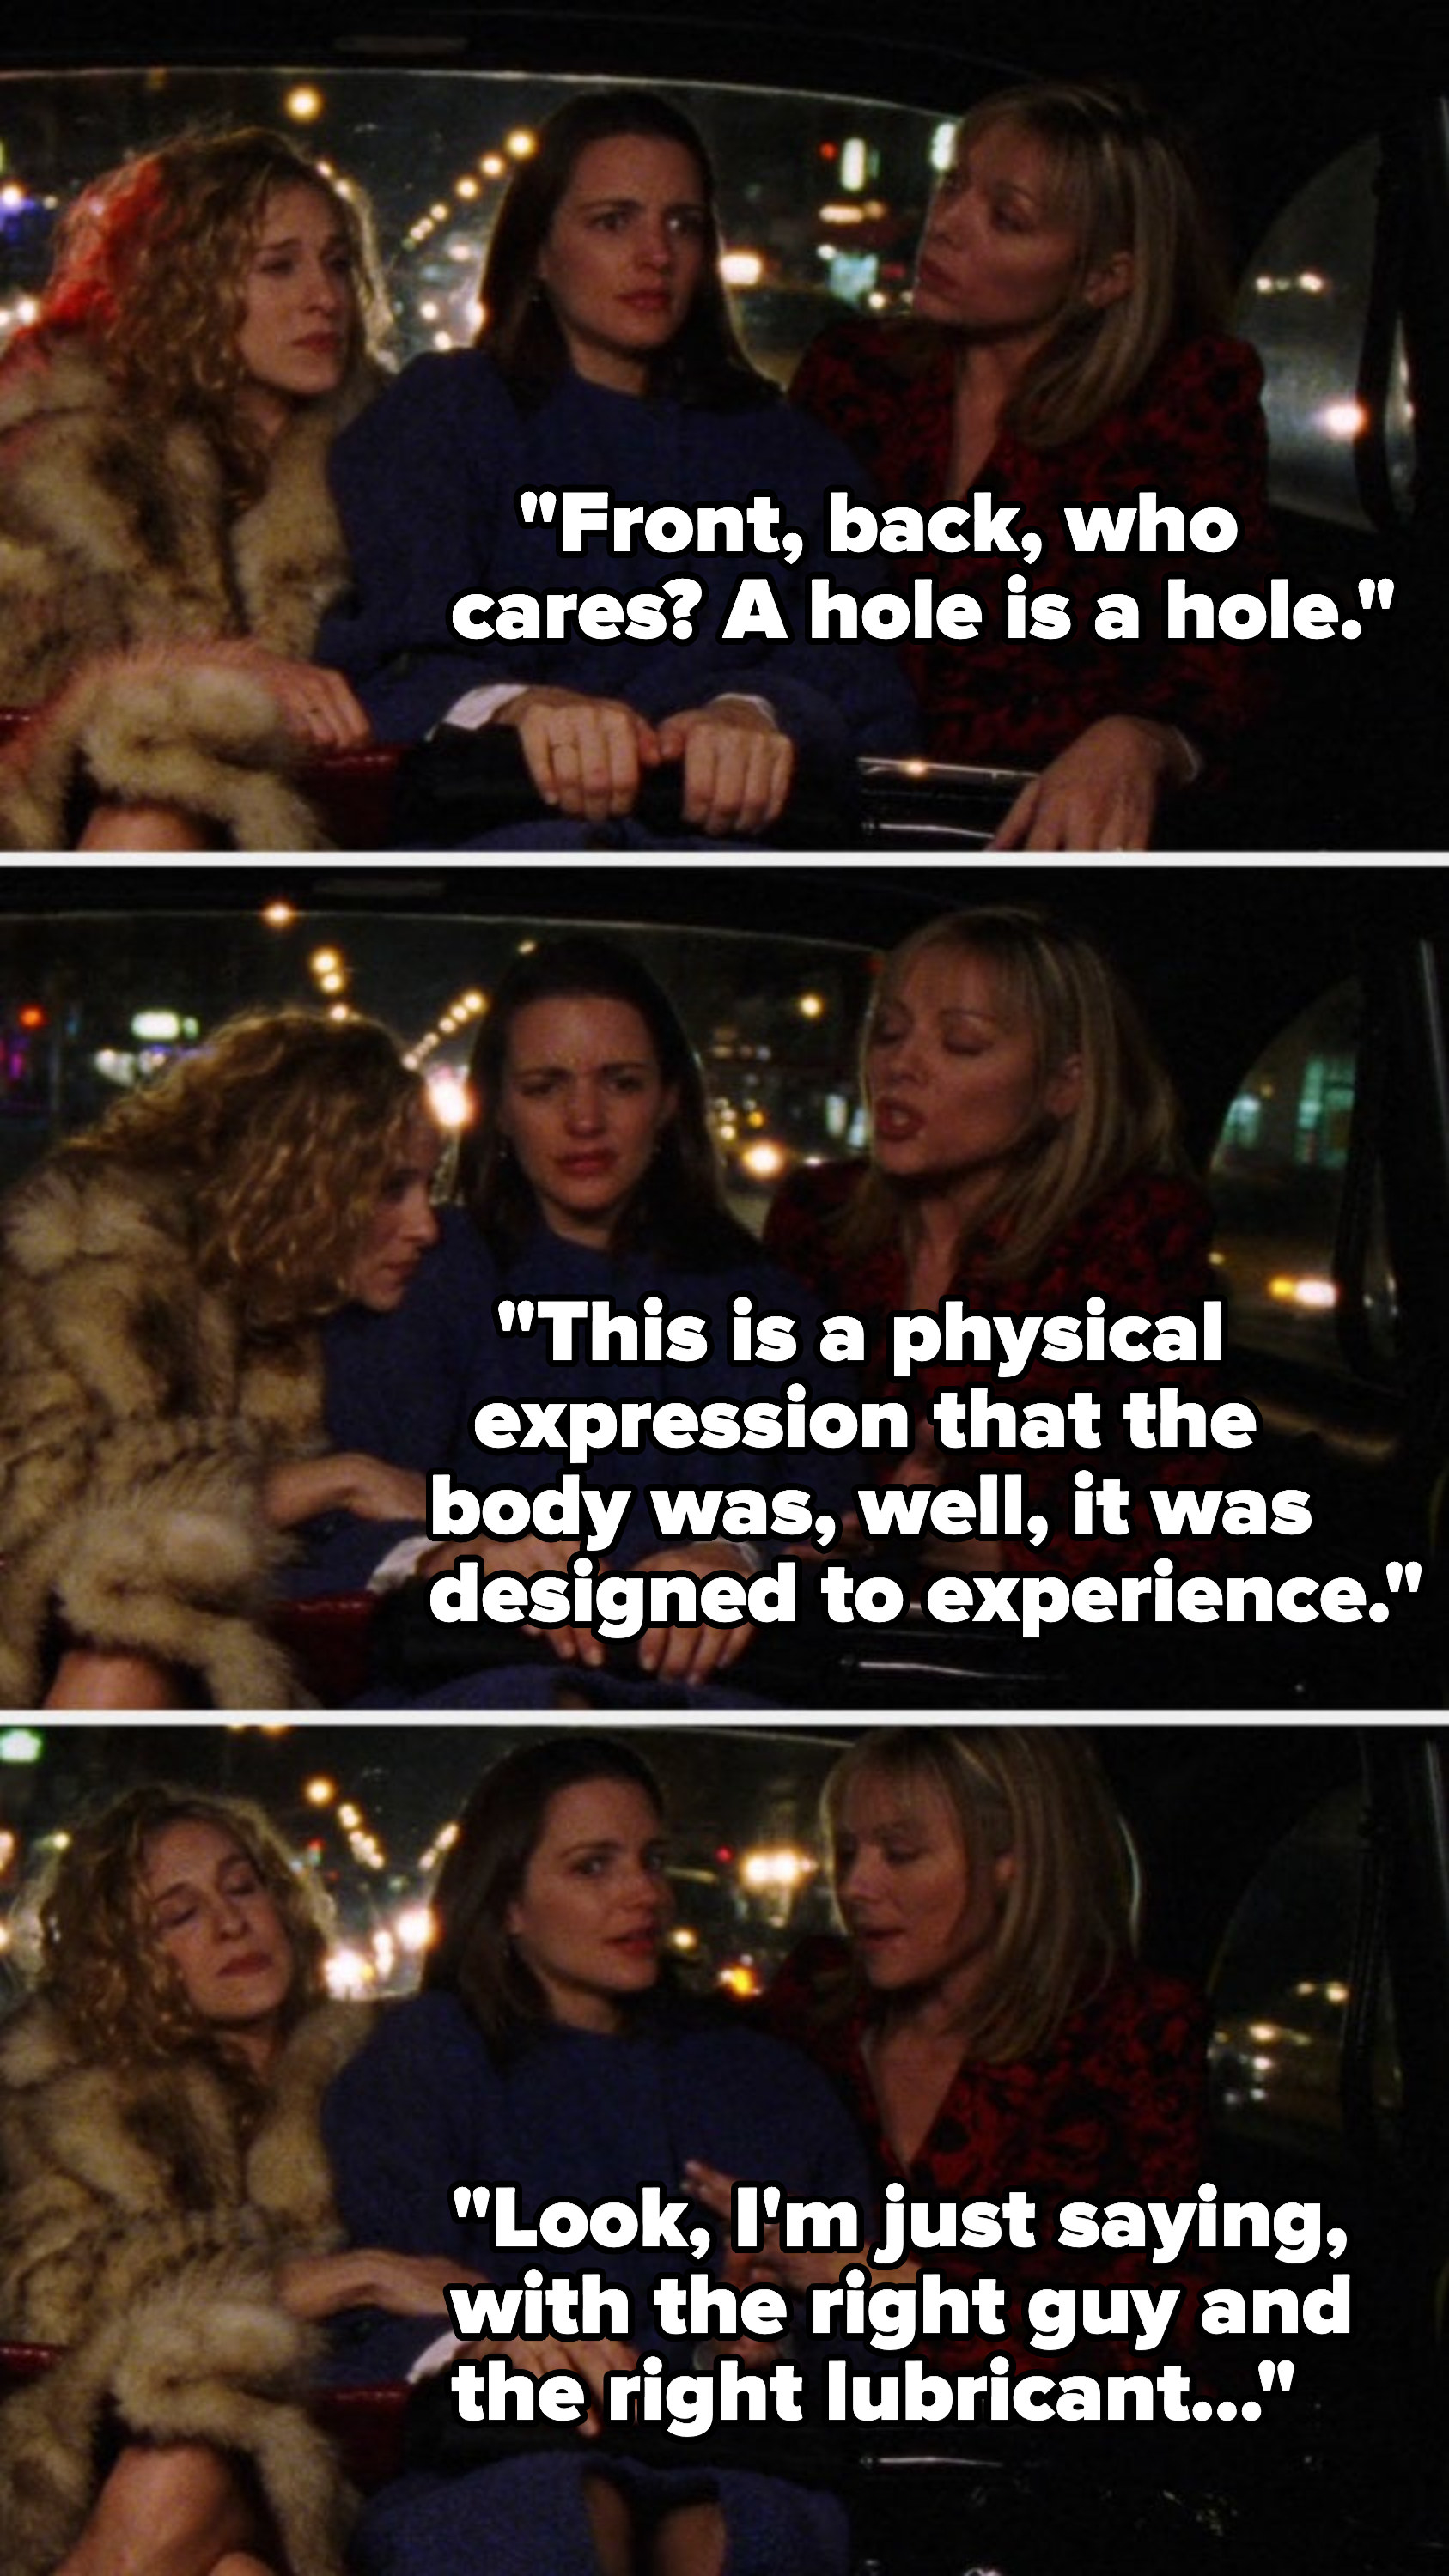 Sam in a car with Carrie and Charlotte and saying, &quot;Front, back, who cares? A hole is a hole,&quot; &quot;This is a physical   expression that the body was designed to experience,&quot; and &quot;Look, I&#x27;m just saying, with the right guy and the right lubricant&quot;